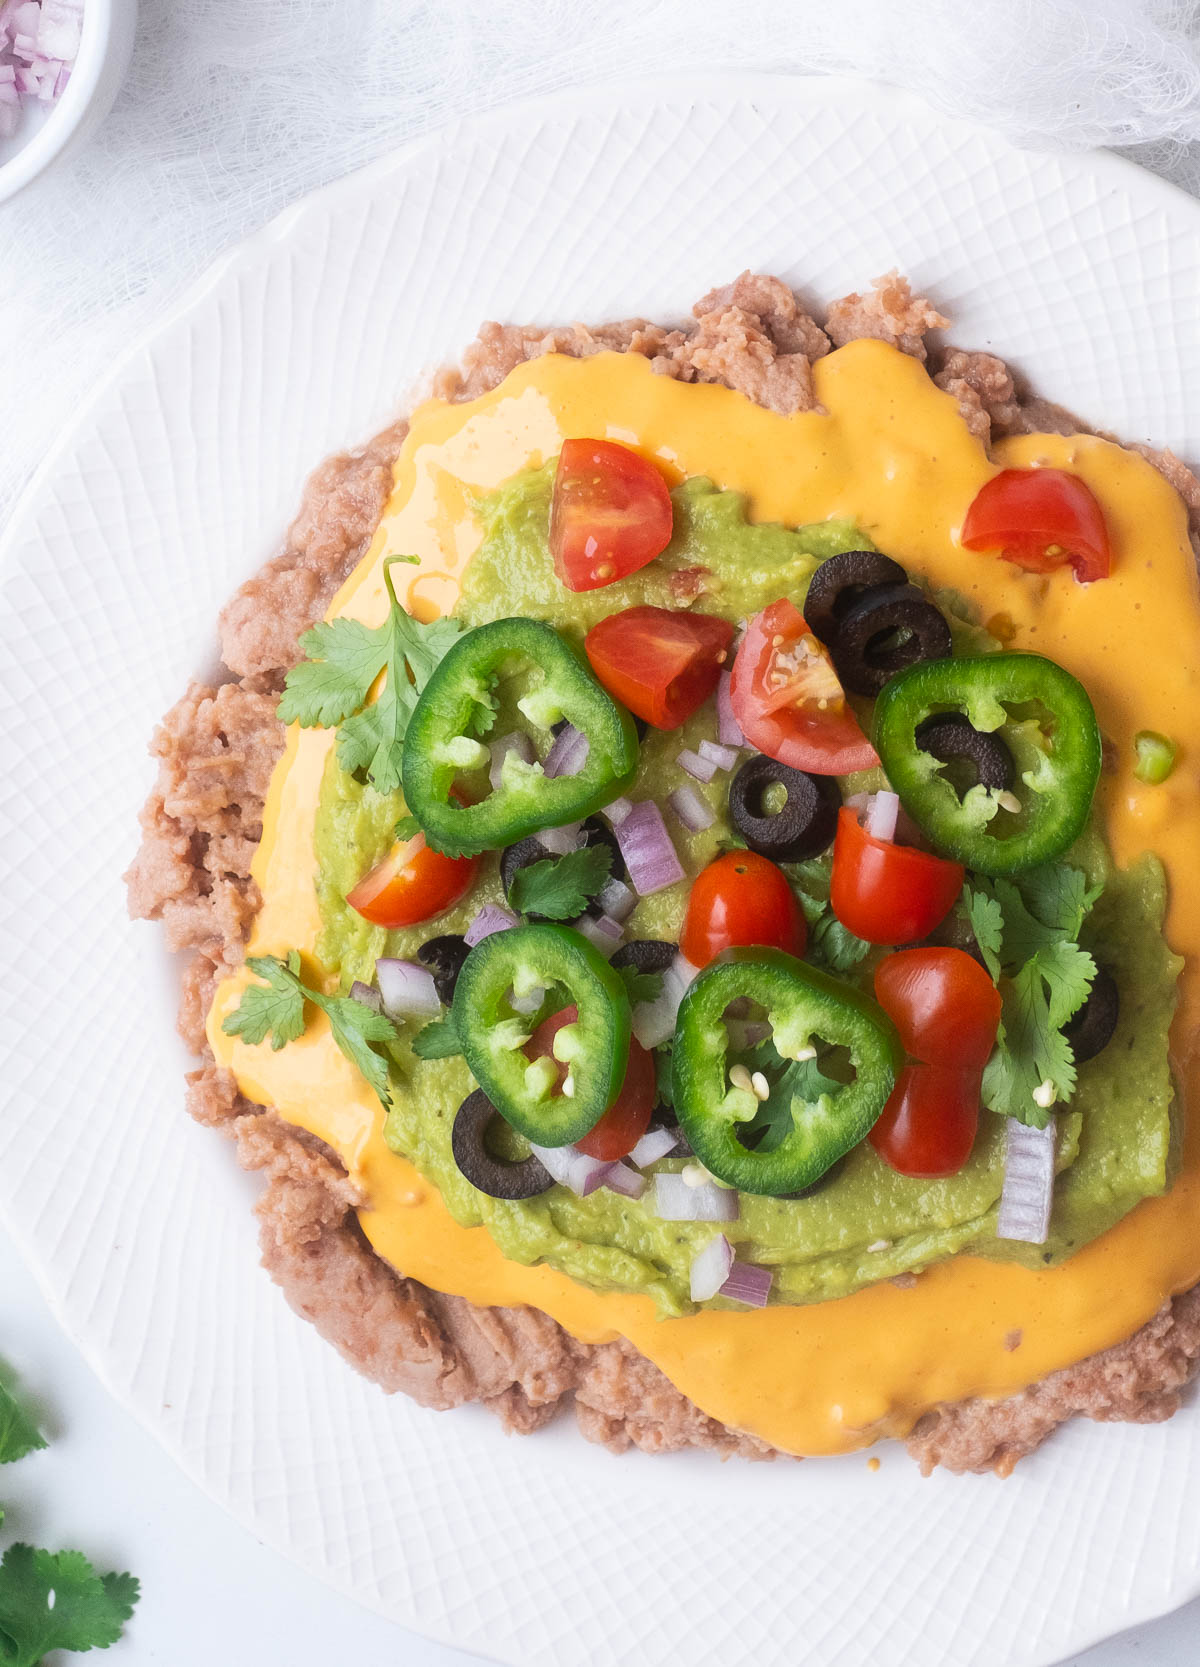 Vegan 7 layer dip with refried beans, cheese sauce, guacamole, and fresh vegetables.